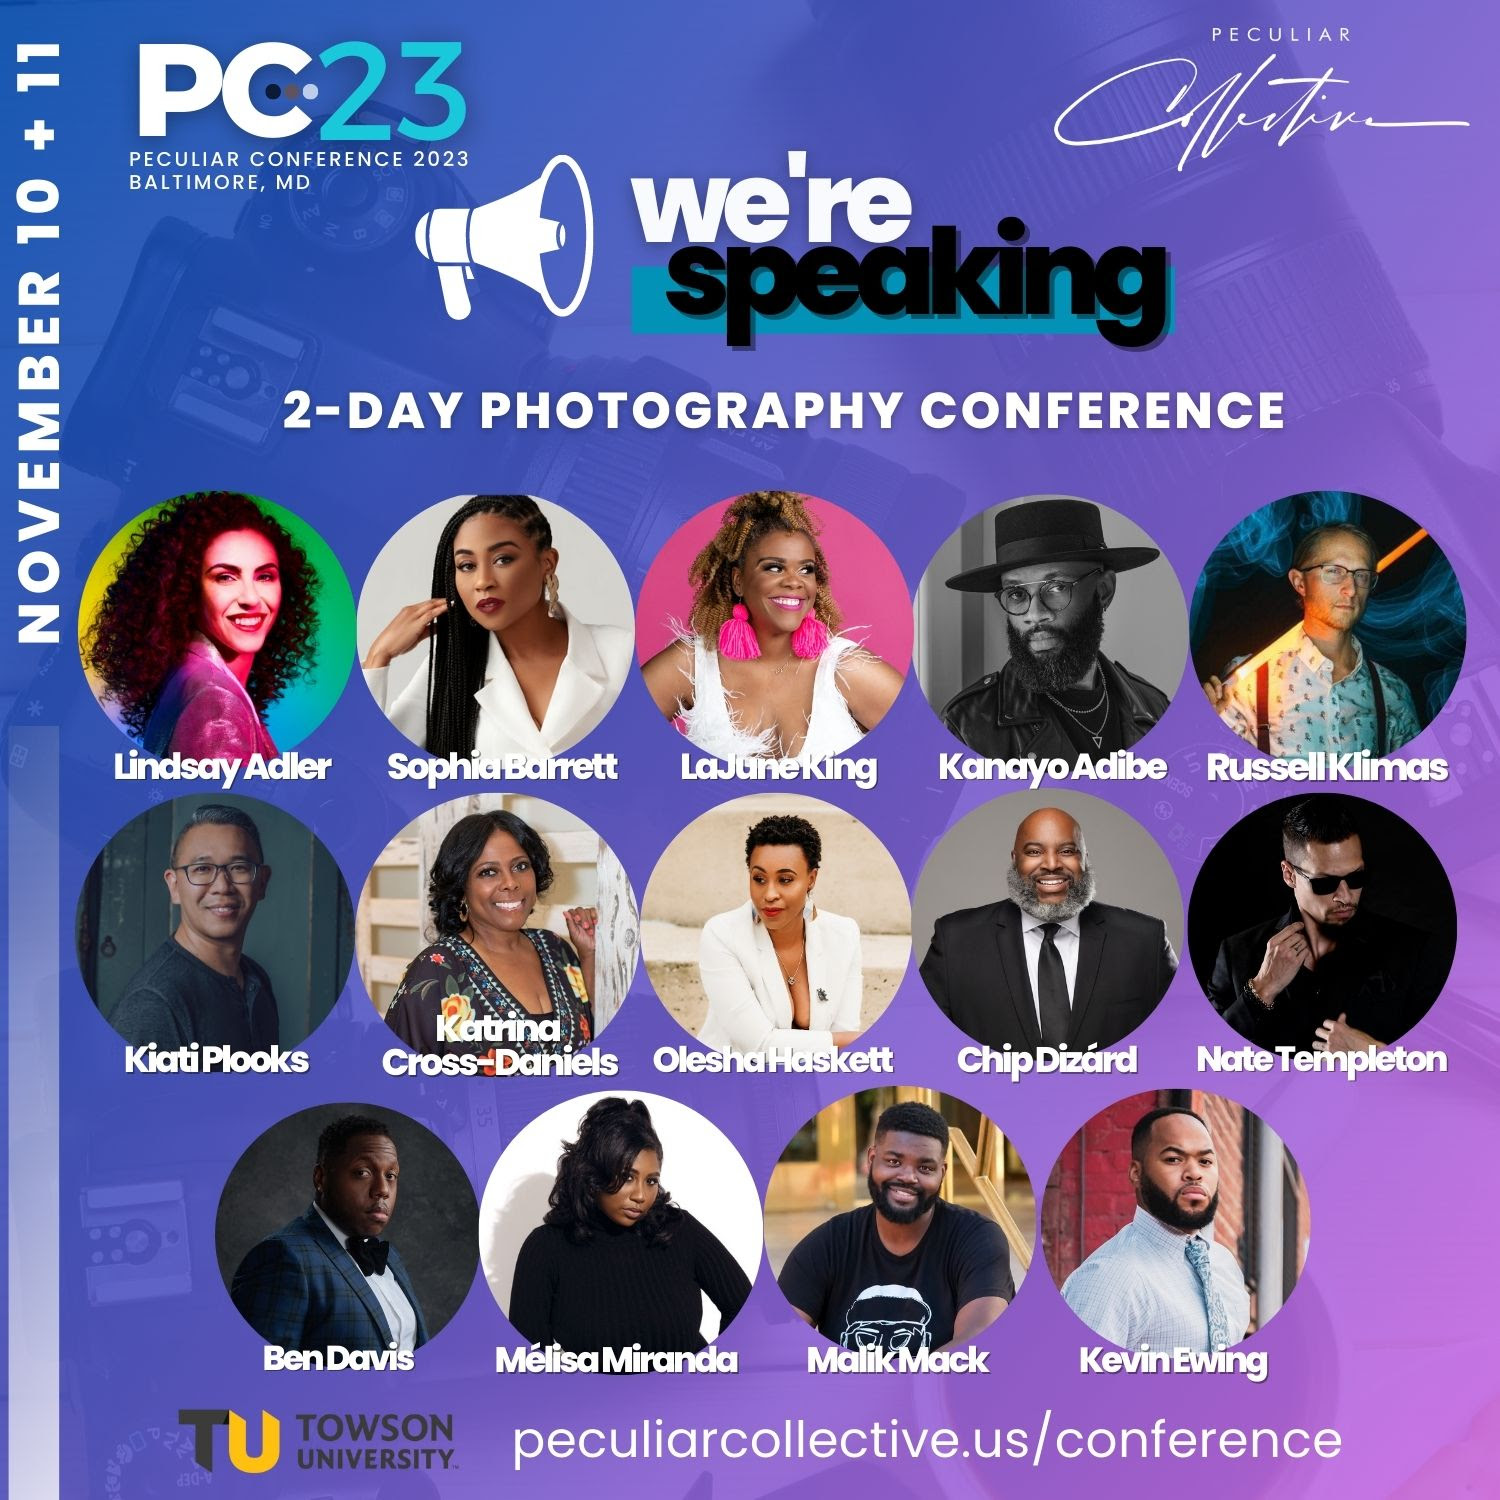 The Peculiar Collective Conference